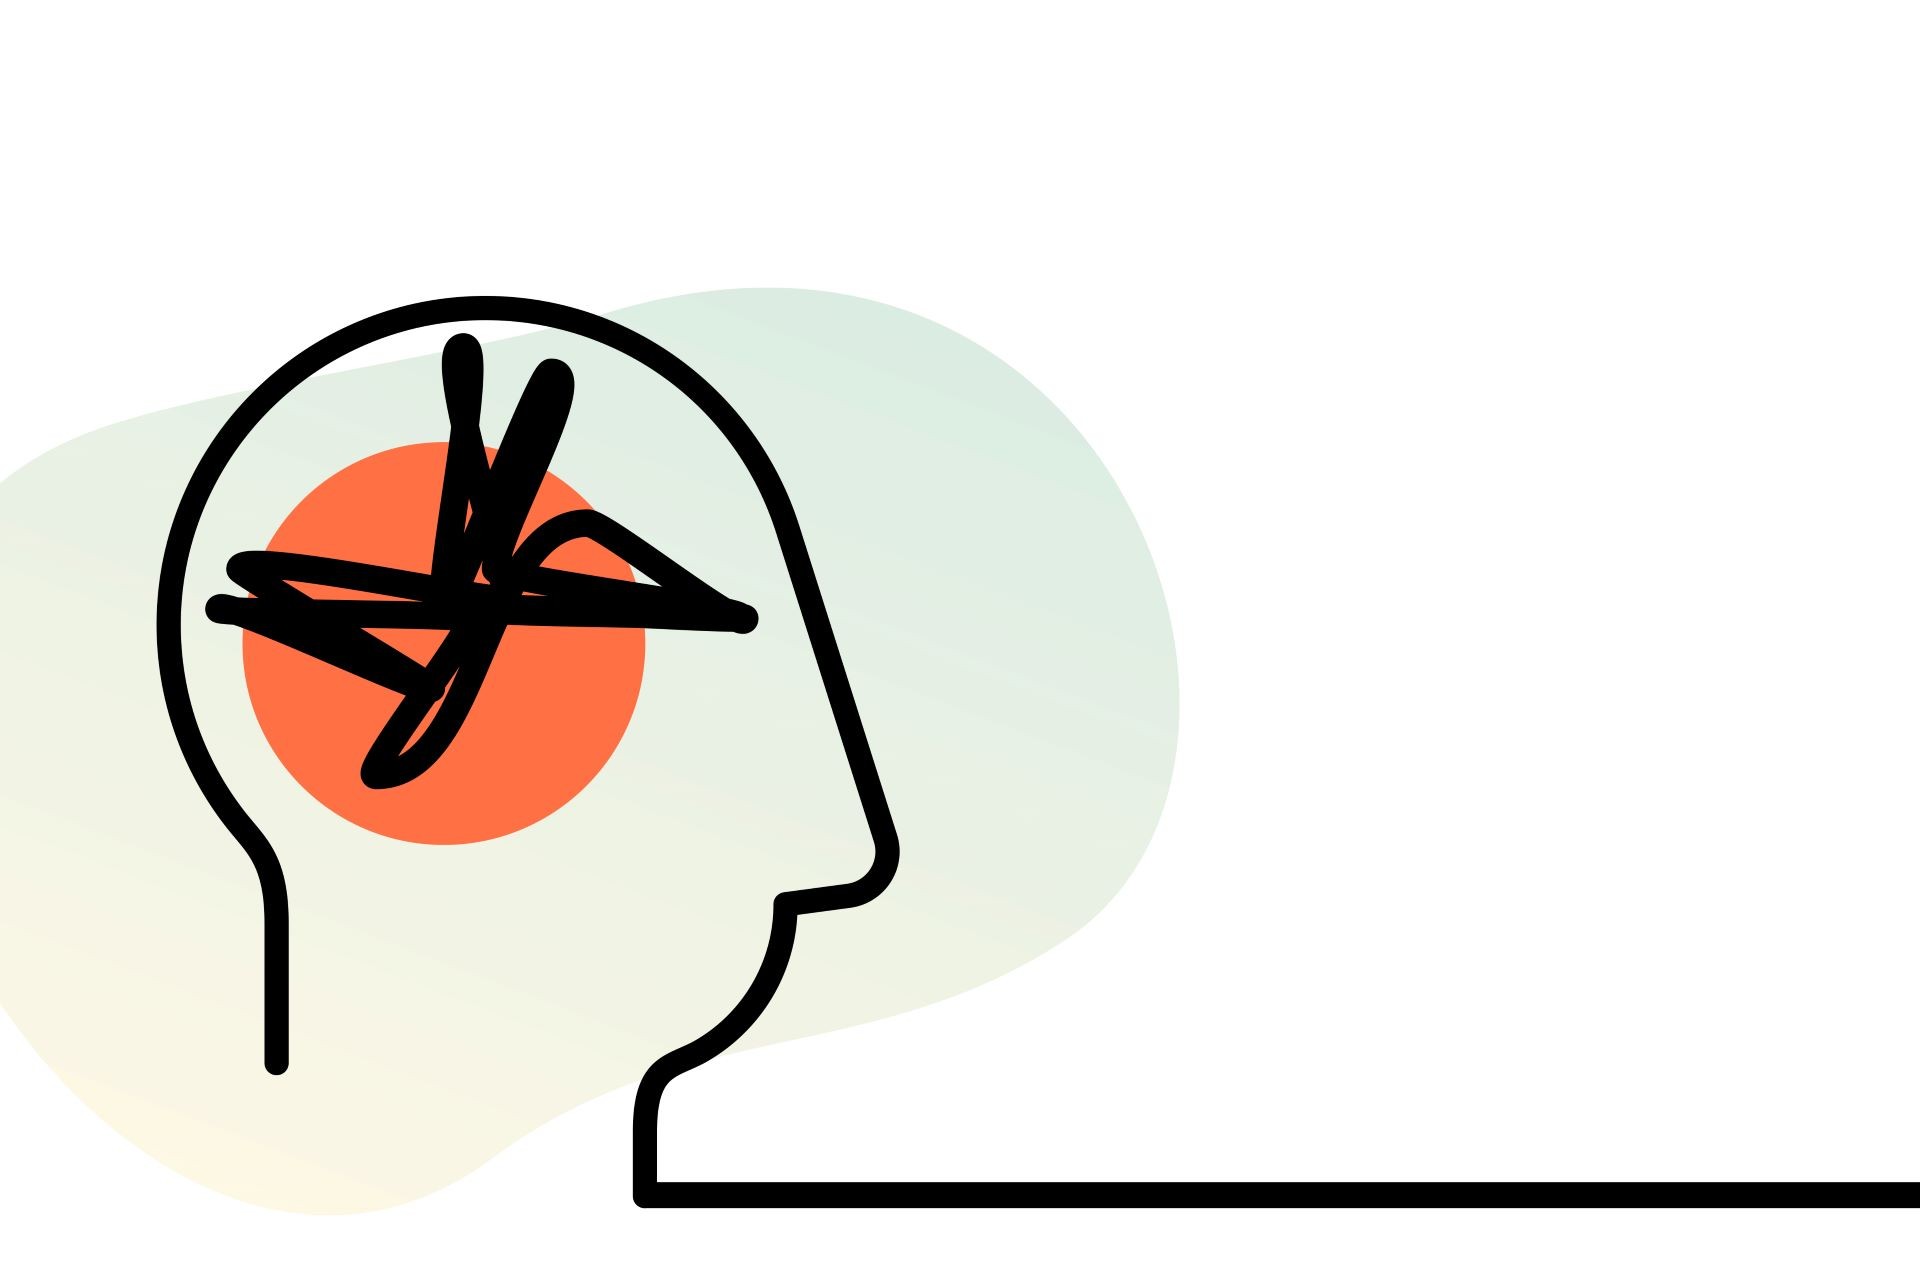 An abstract representation of a profile with an orange circular motif with black squiggles representing the brain